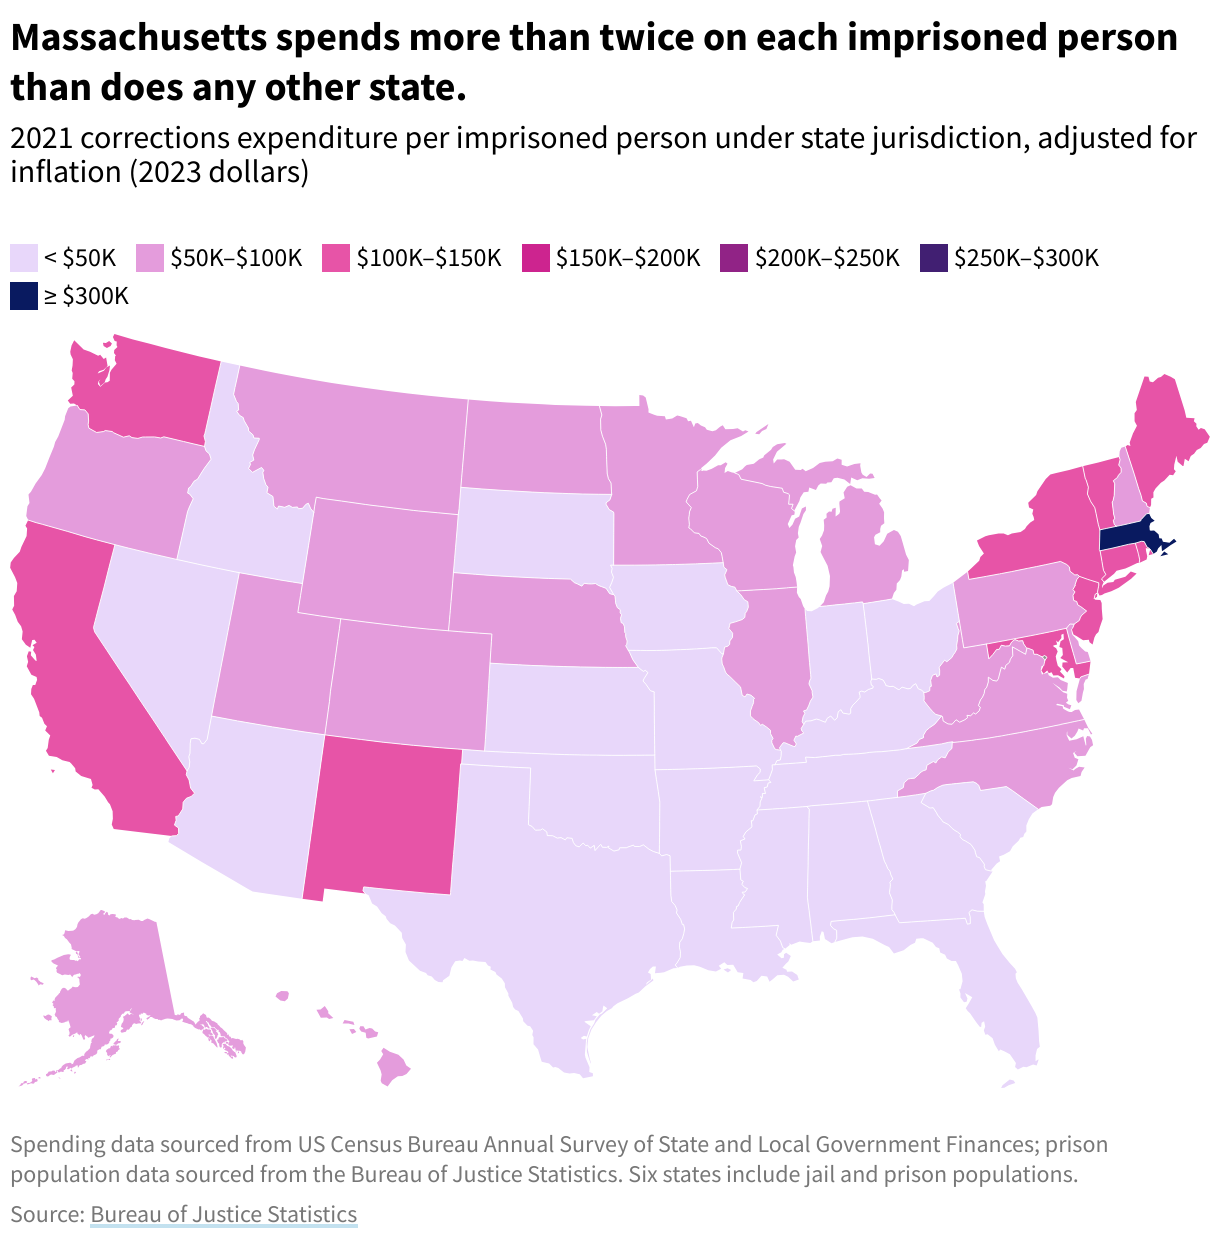 A map of corrections funding spent per imprisoned person under state jurisdiction in 2021. Massachusetts spends more than twice on each imprisoned person than does any other state.